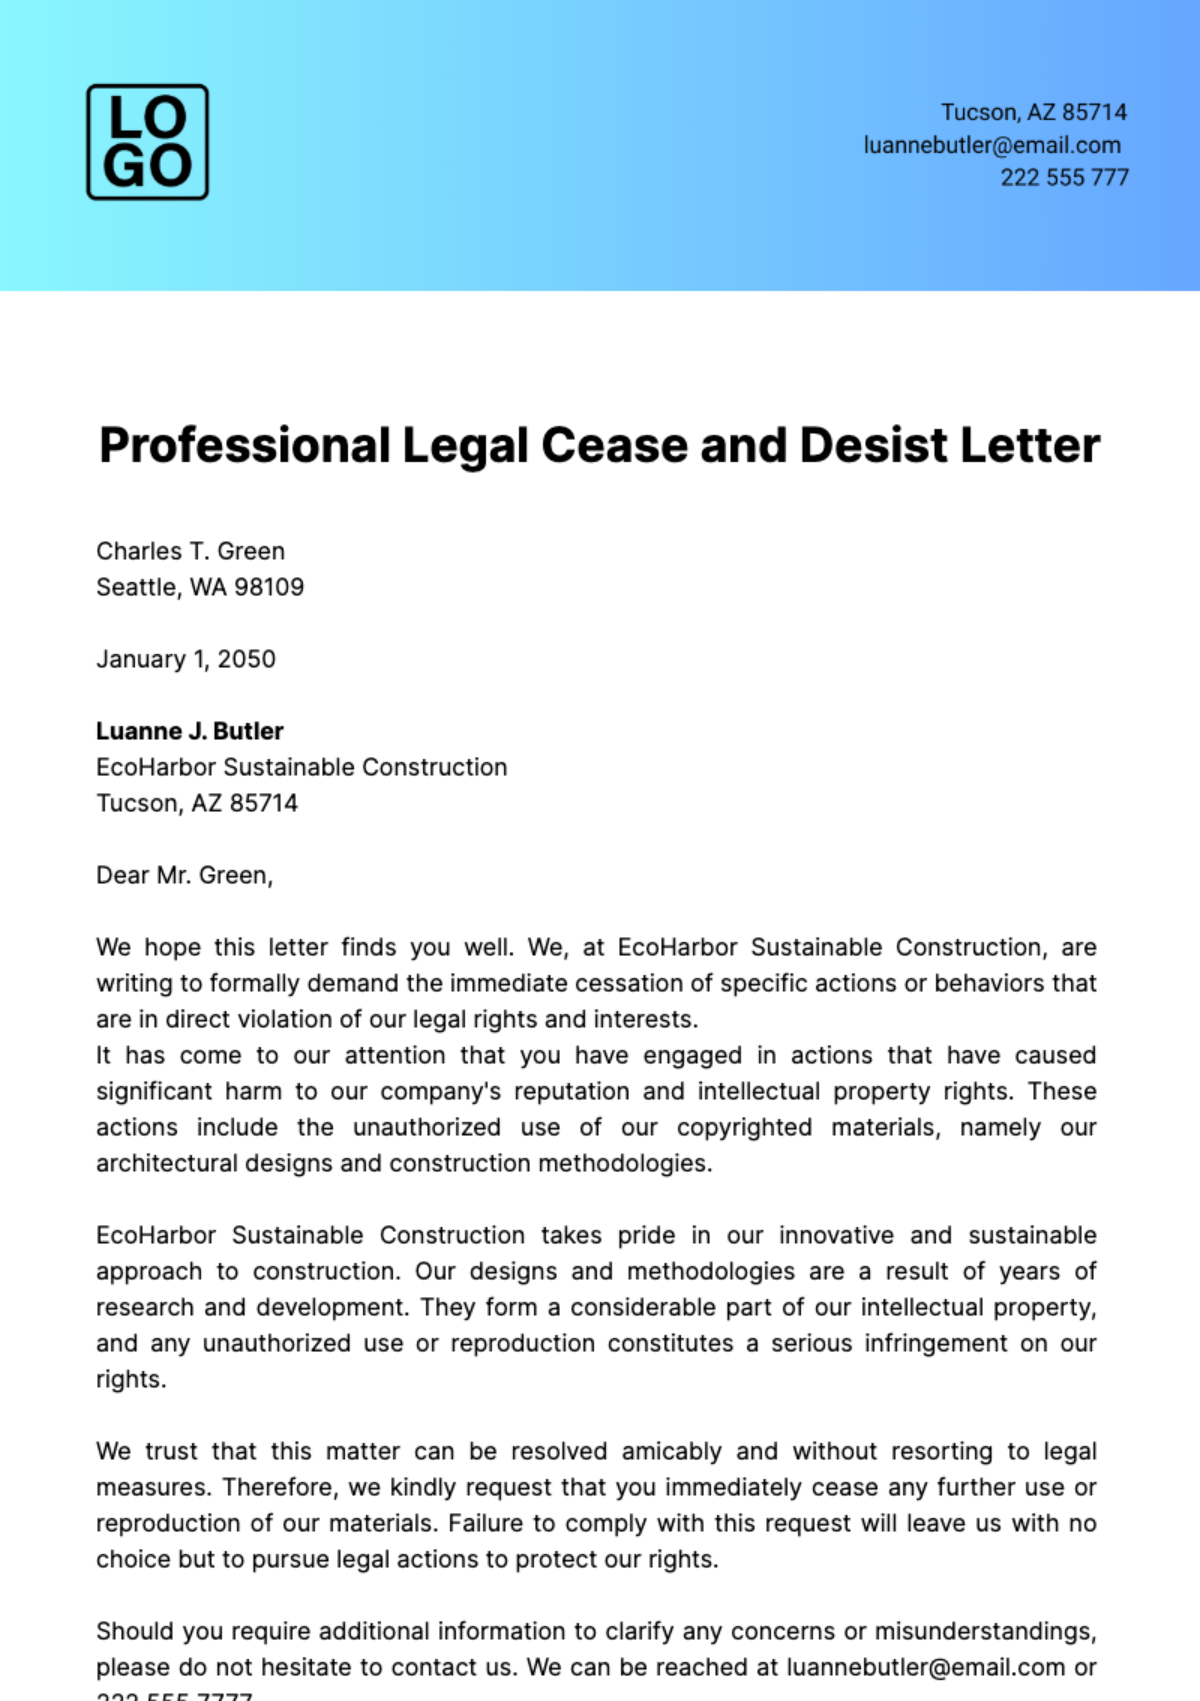 Professional Legal Cease and Desist Letter Template